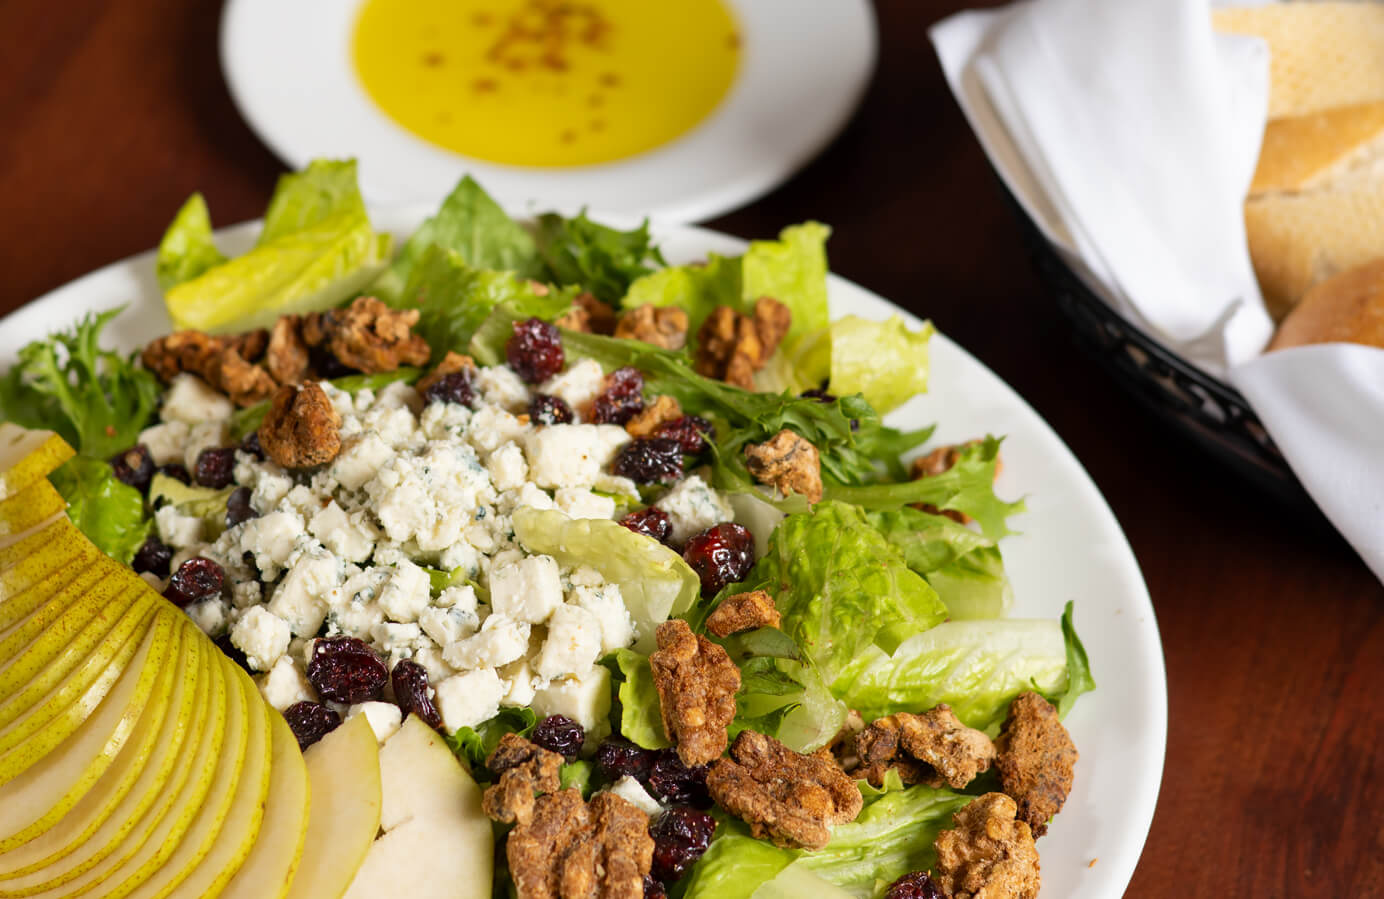 Pear and Gorgonzola Salad with Maple Vinaigrette